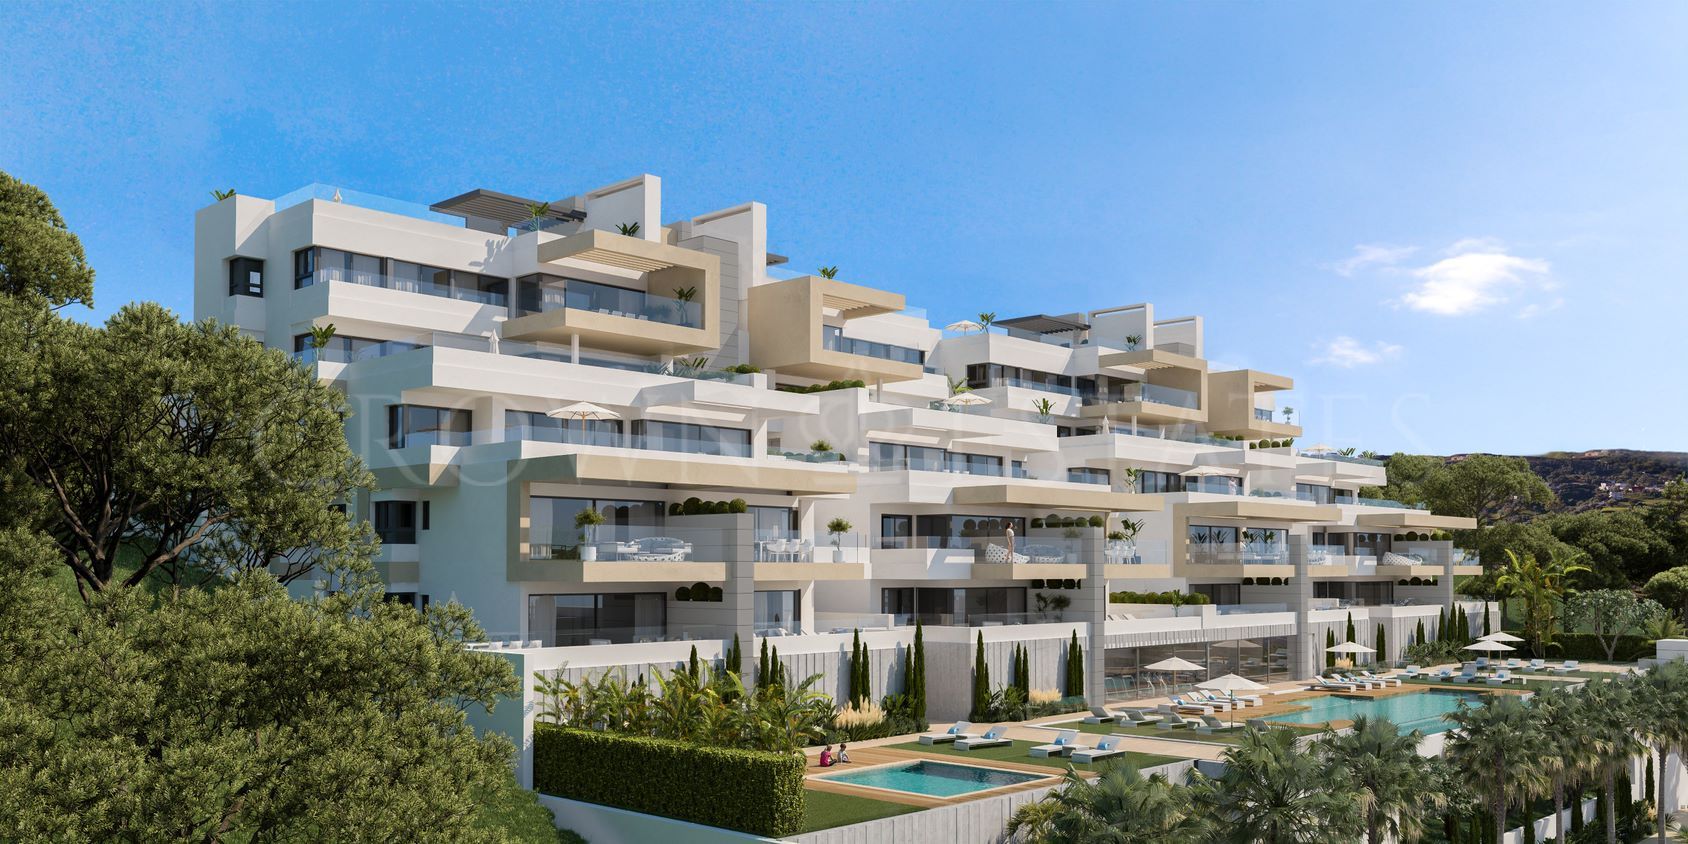 South Bay Las Mesas, 47 modern apartments with amazing seaviews in the heart of Estepona.